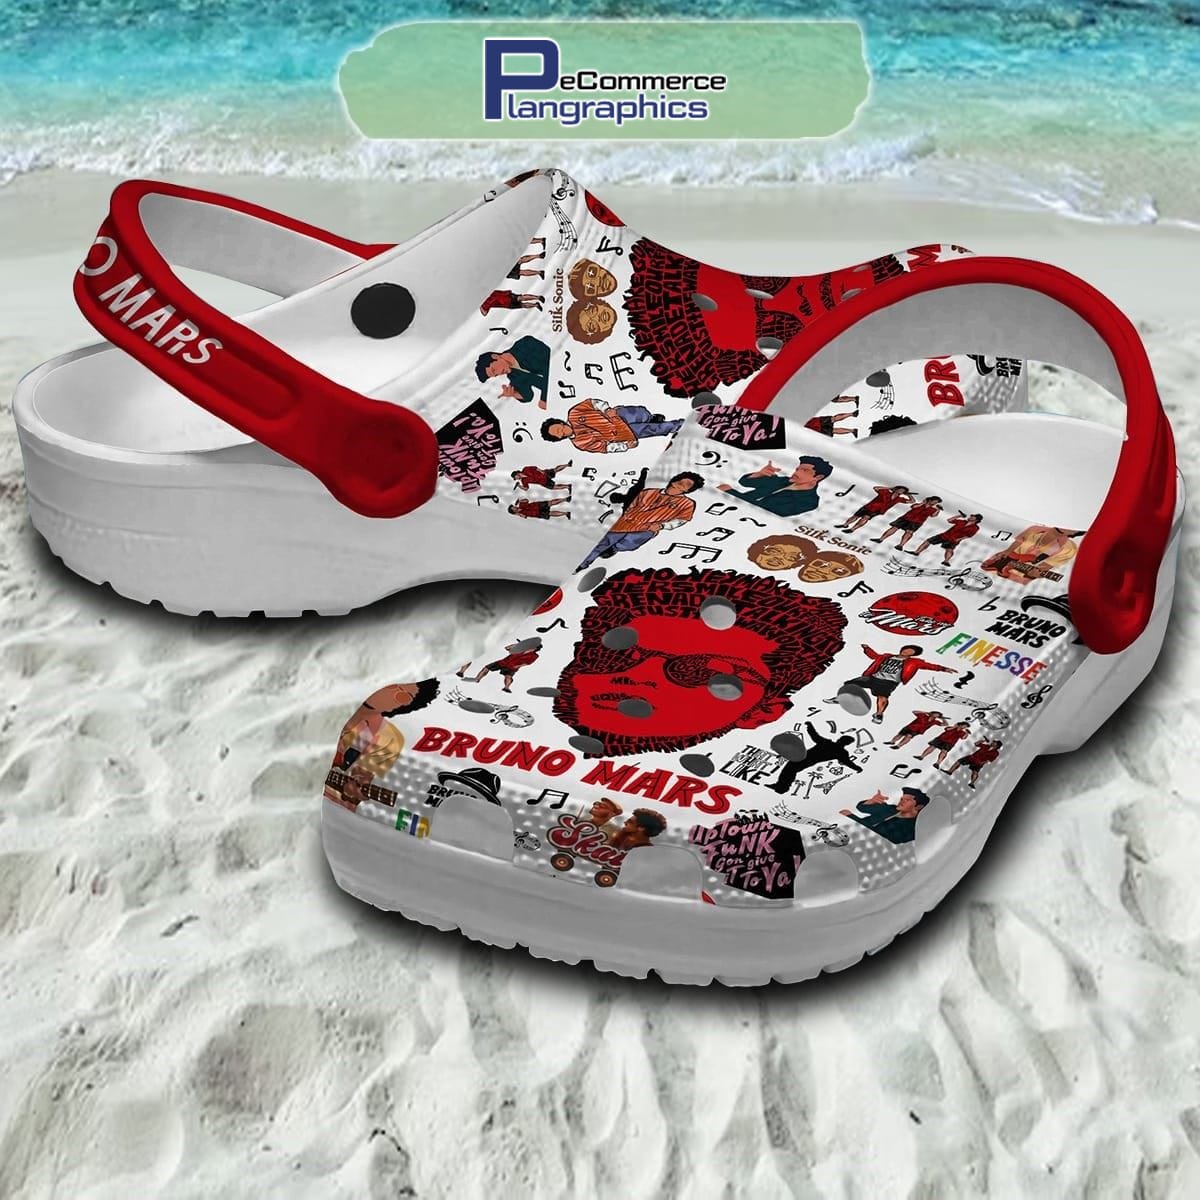 Bruno Mars That's What I Like Crocs Shoes - Plangraphics